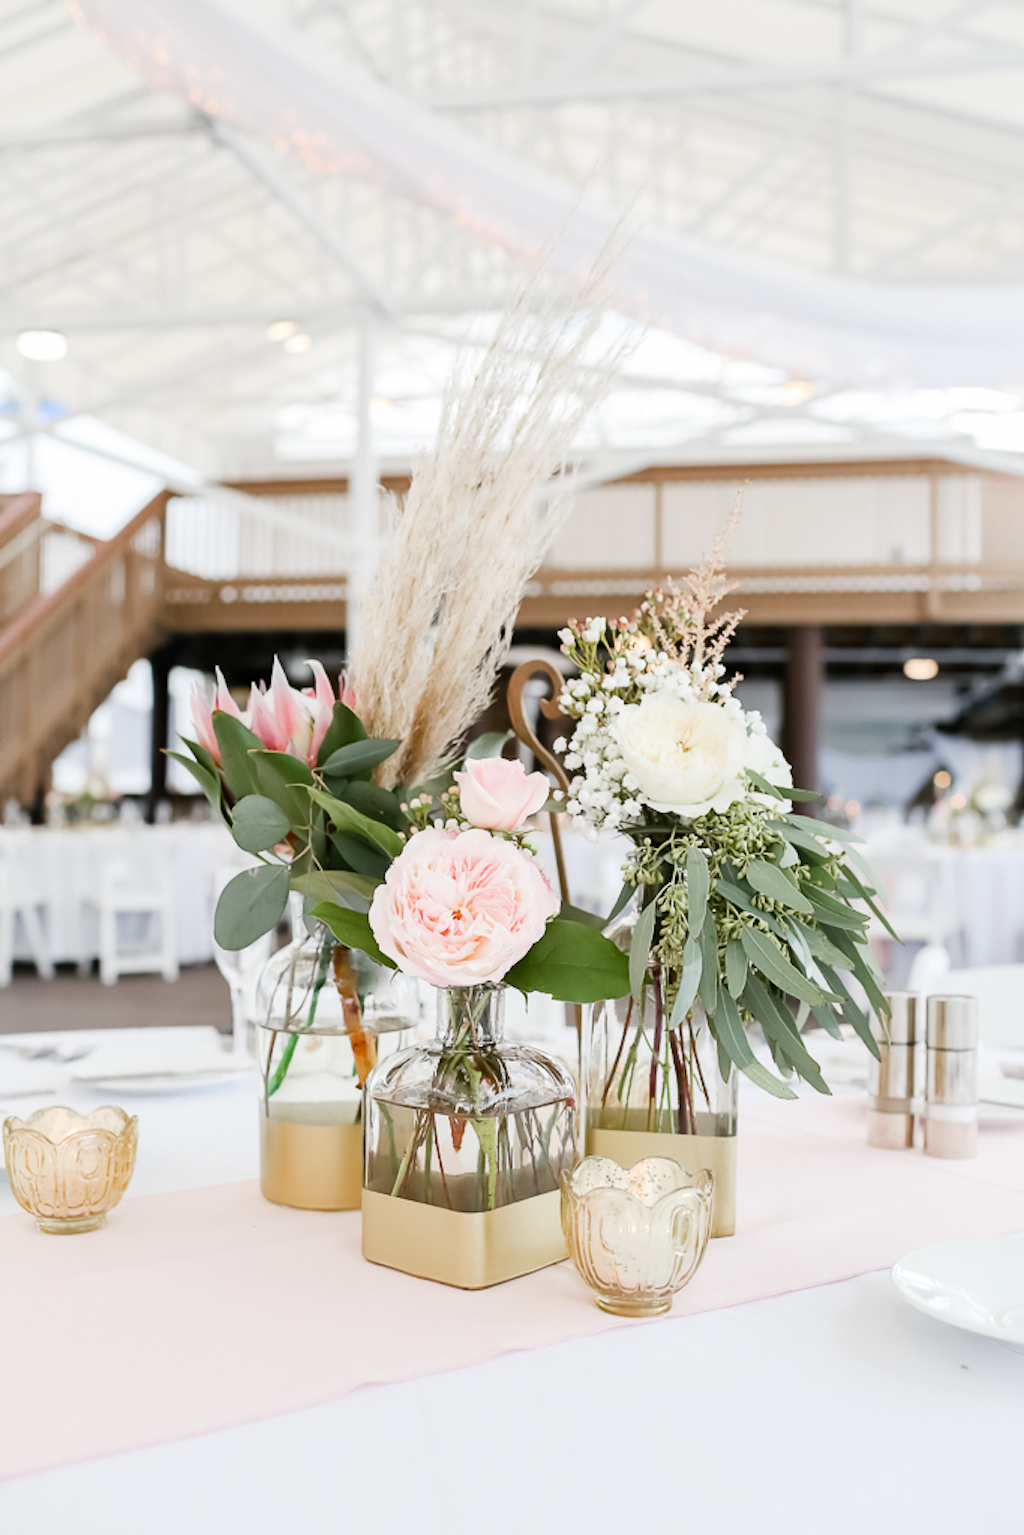 Tropical Inspired Wedding Reception Decor, Blush Pink and White Garden Roses with Greenery, Pink King Protea, in Clear Glass and Gold Vase, Low Floral Centerpiece | Photographer Lifelong Photography Studios